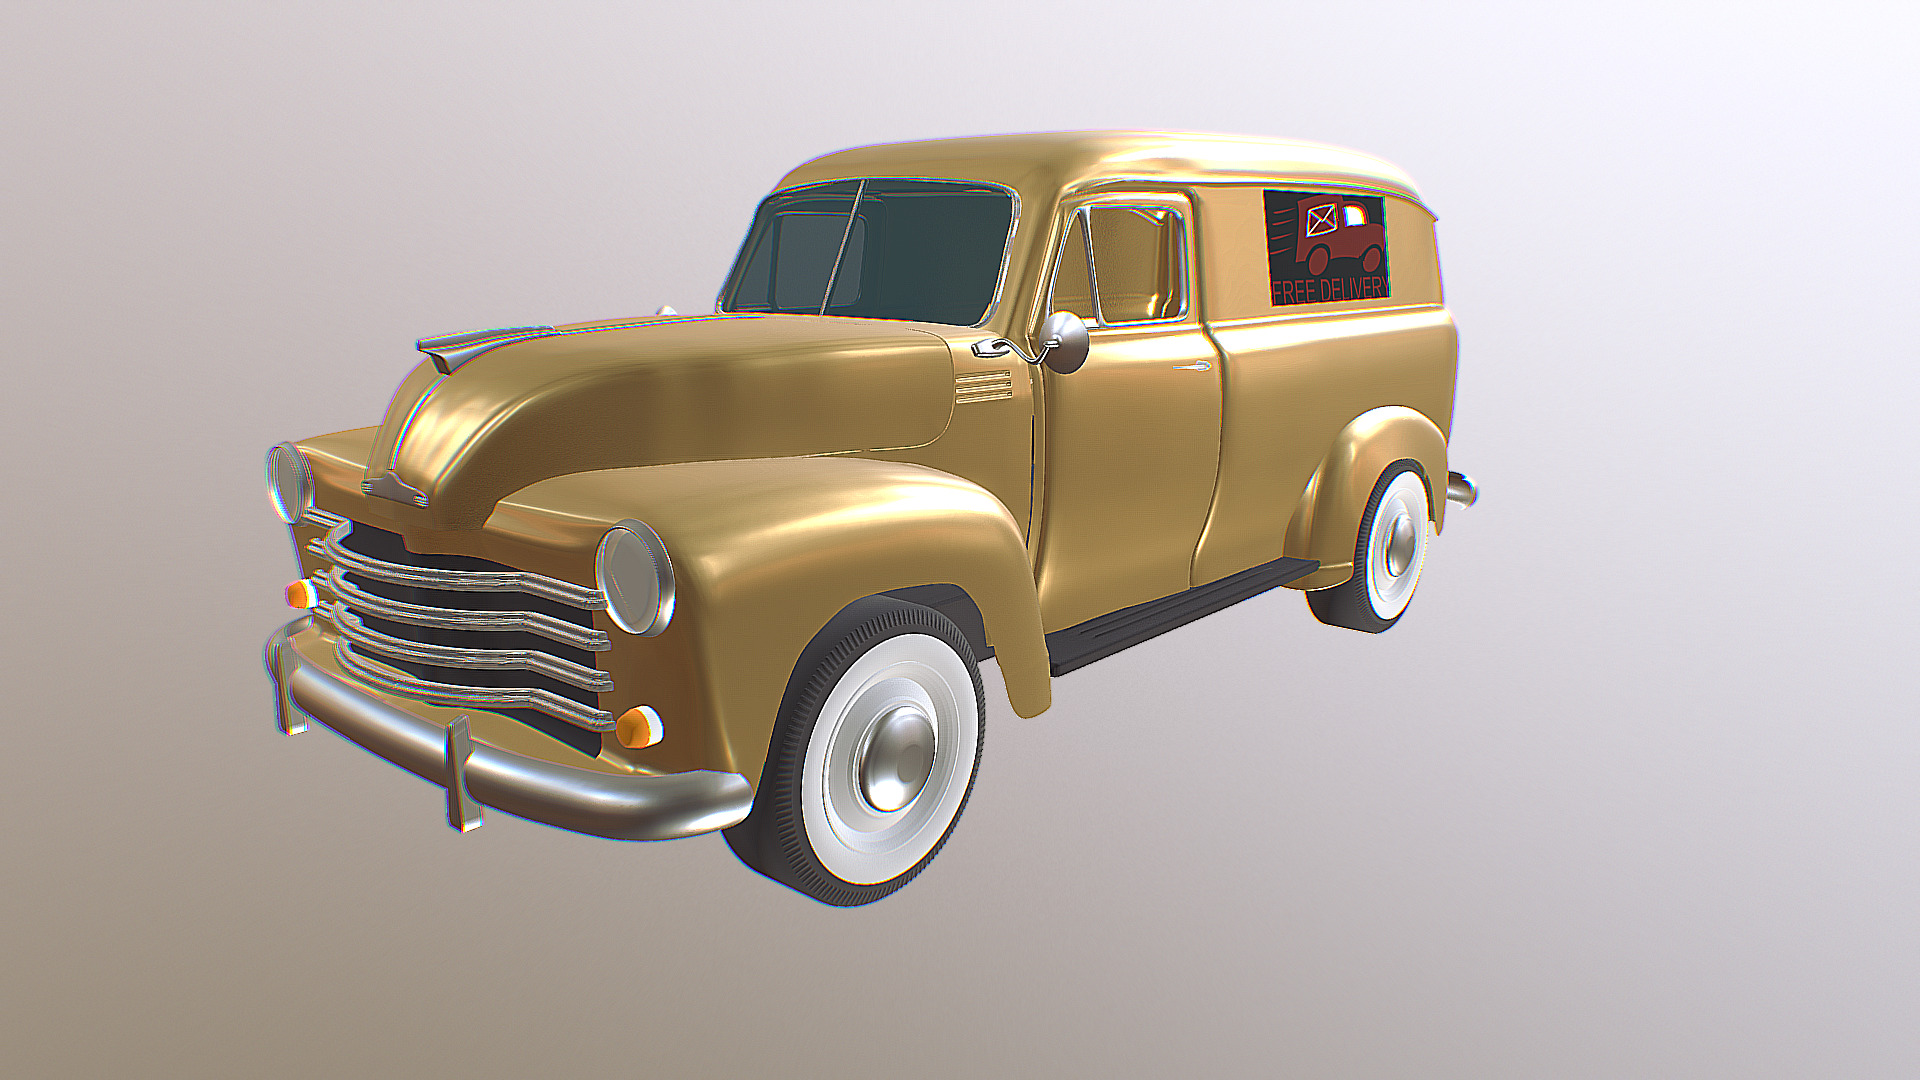 3D model 1951 Chev Delivery Van - This is a 3D model of the 1951 Chev Delivery Van. The 3D model is about a toy car with a sign on it.